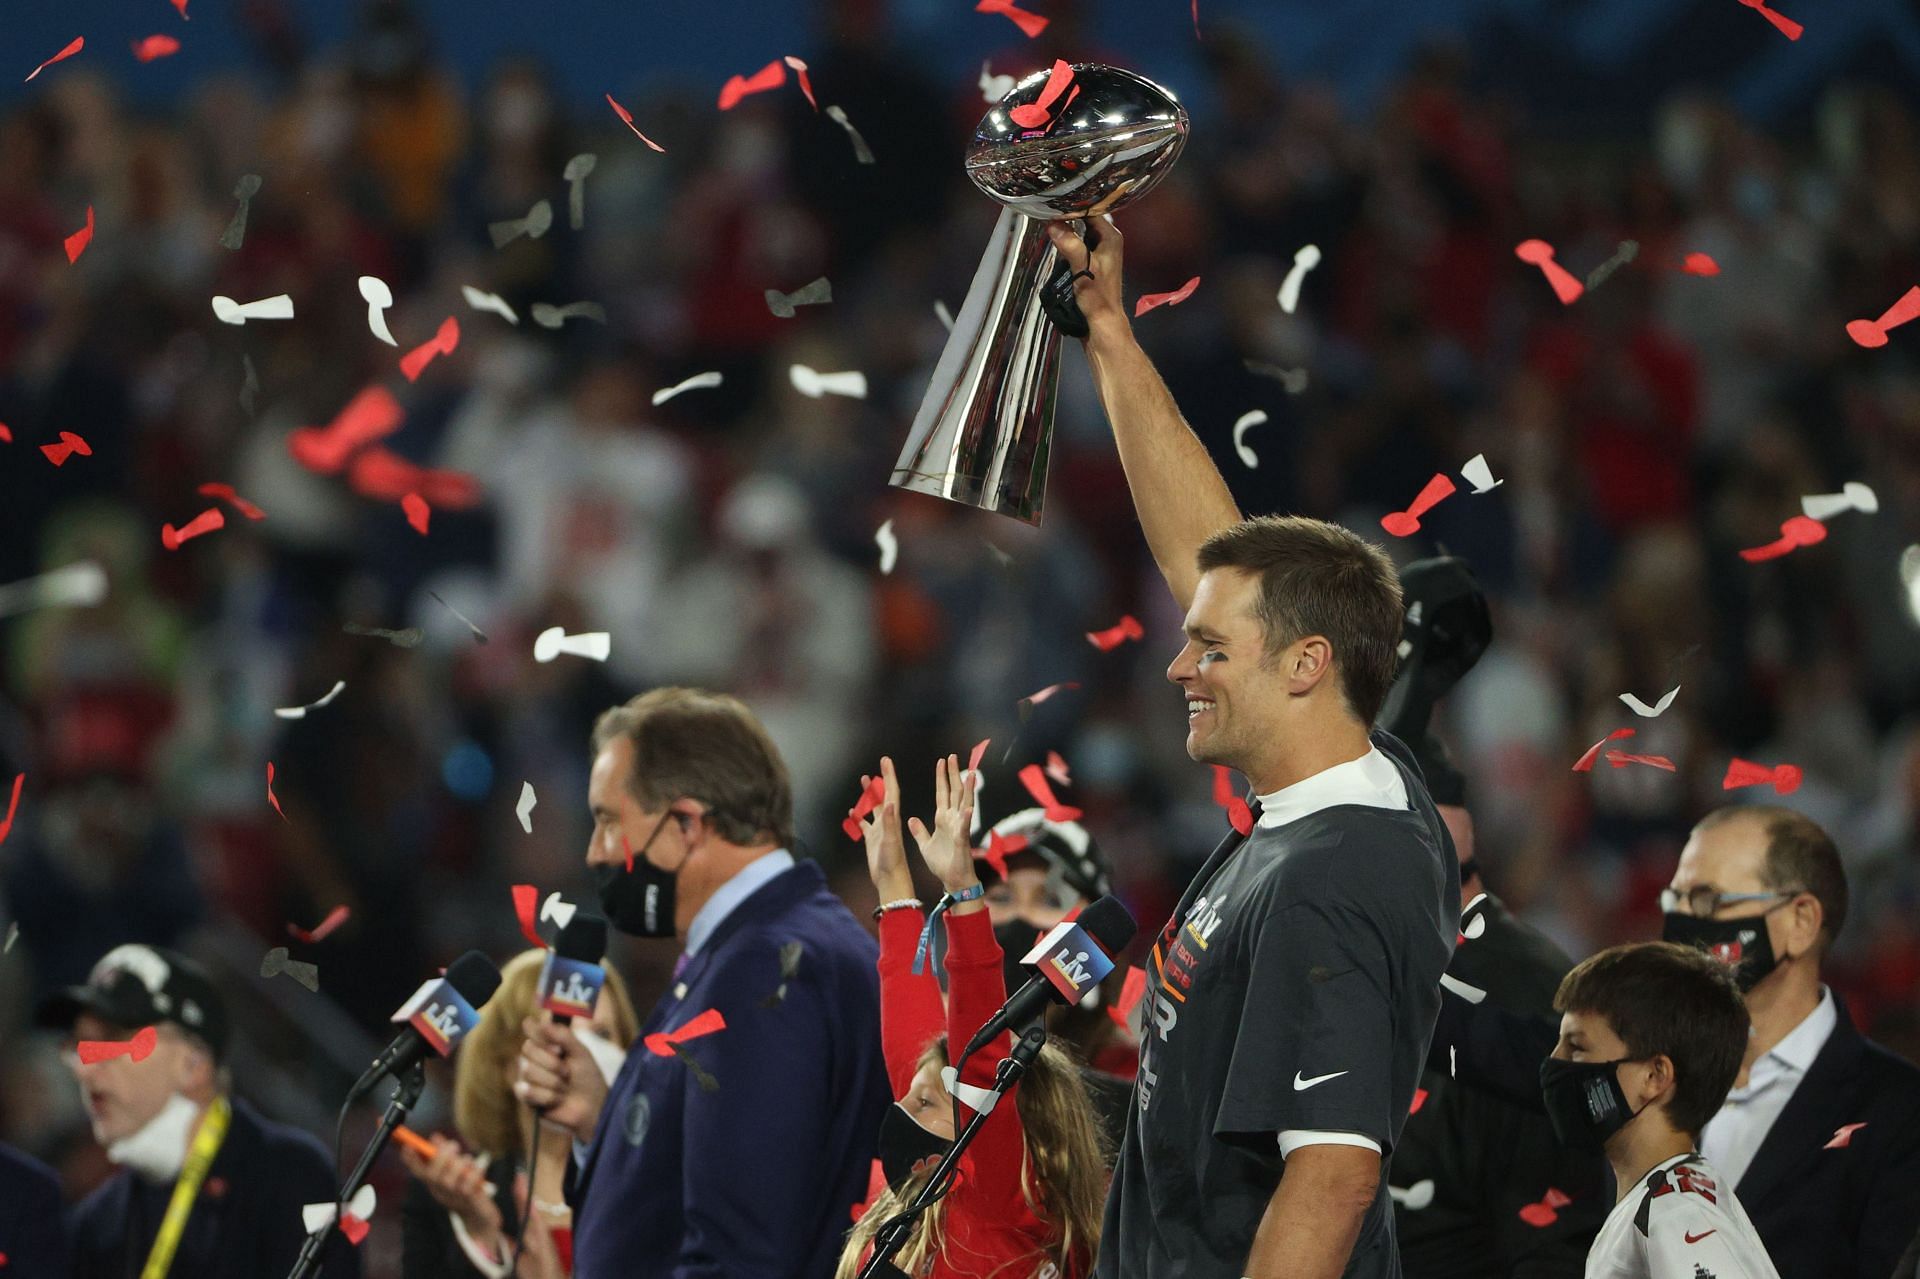 Brady after winning Super Bowl LV with the Buccaneers